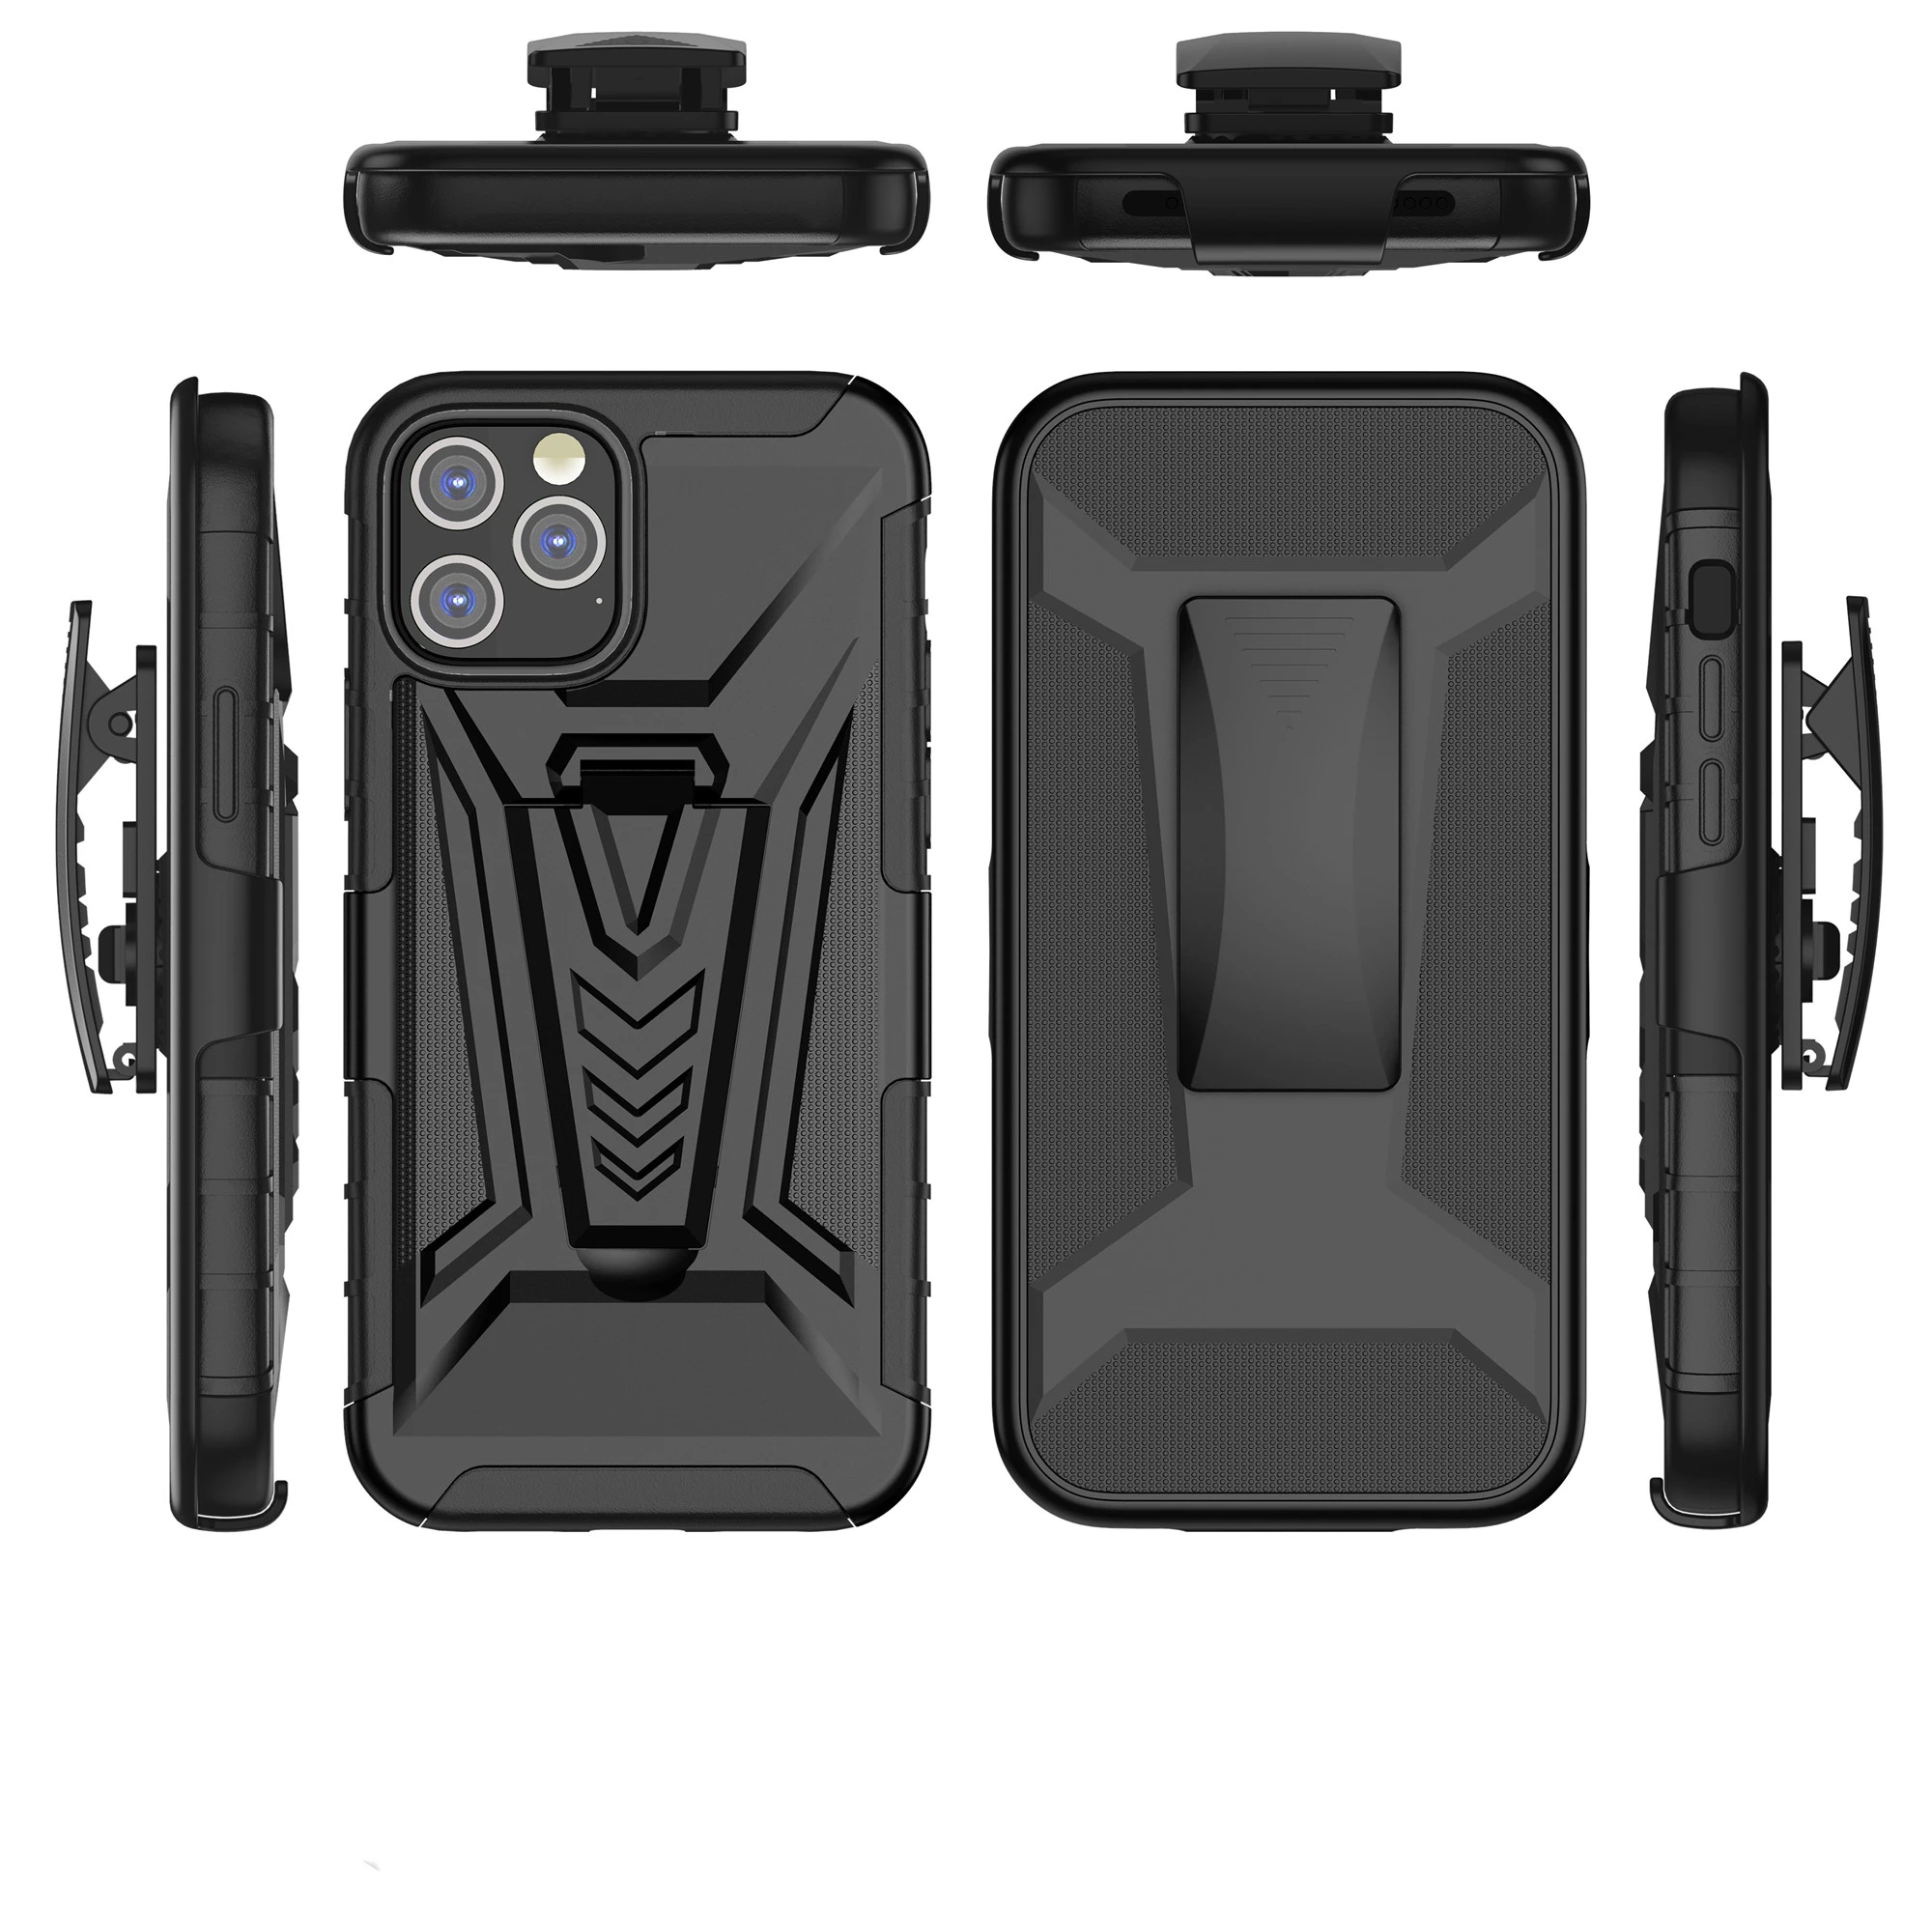 3 in 1 Armor Shockproof Case For iPhone 13 12 mini 11 Pro MAX XS XR 6s 7 8 Plus Cases Belt Clip kickstand Full Protection Cover iphone 13 pro max cover iPhone 13 Pro Max